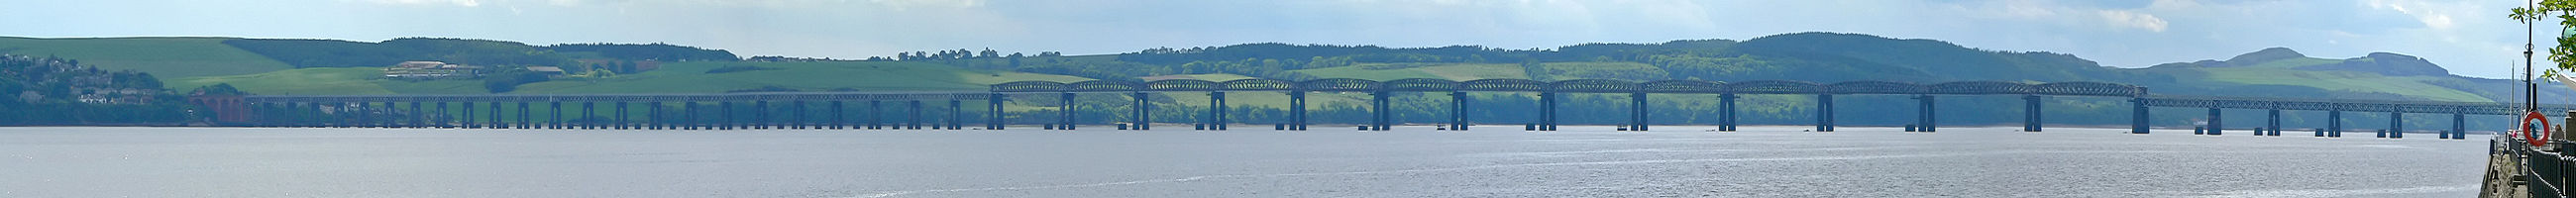 The full length of the second Tay Bridge.